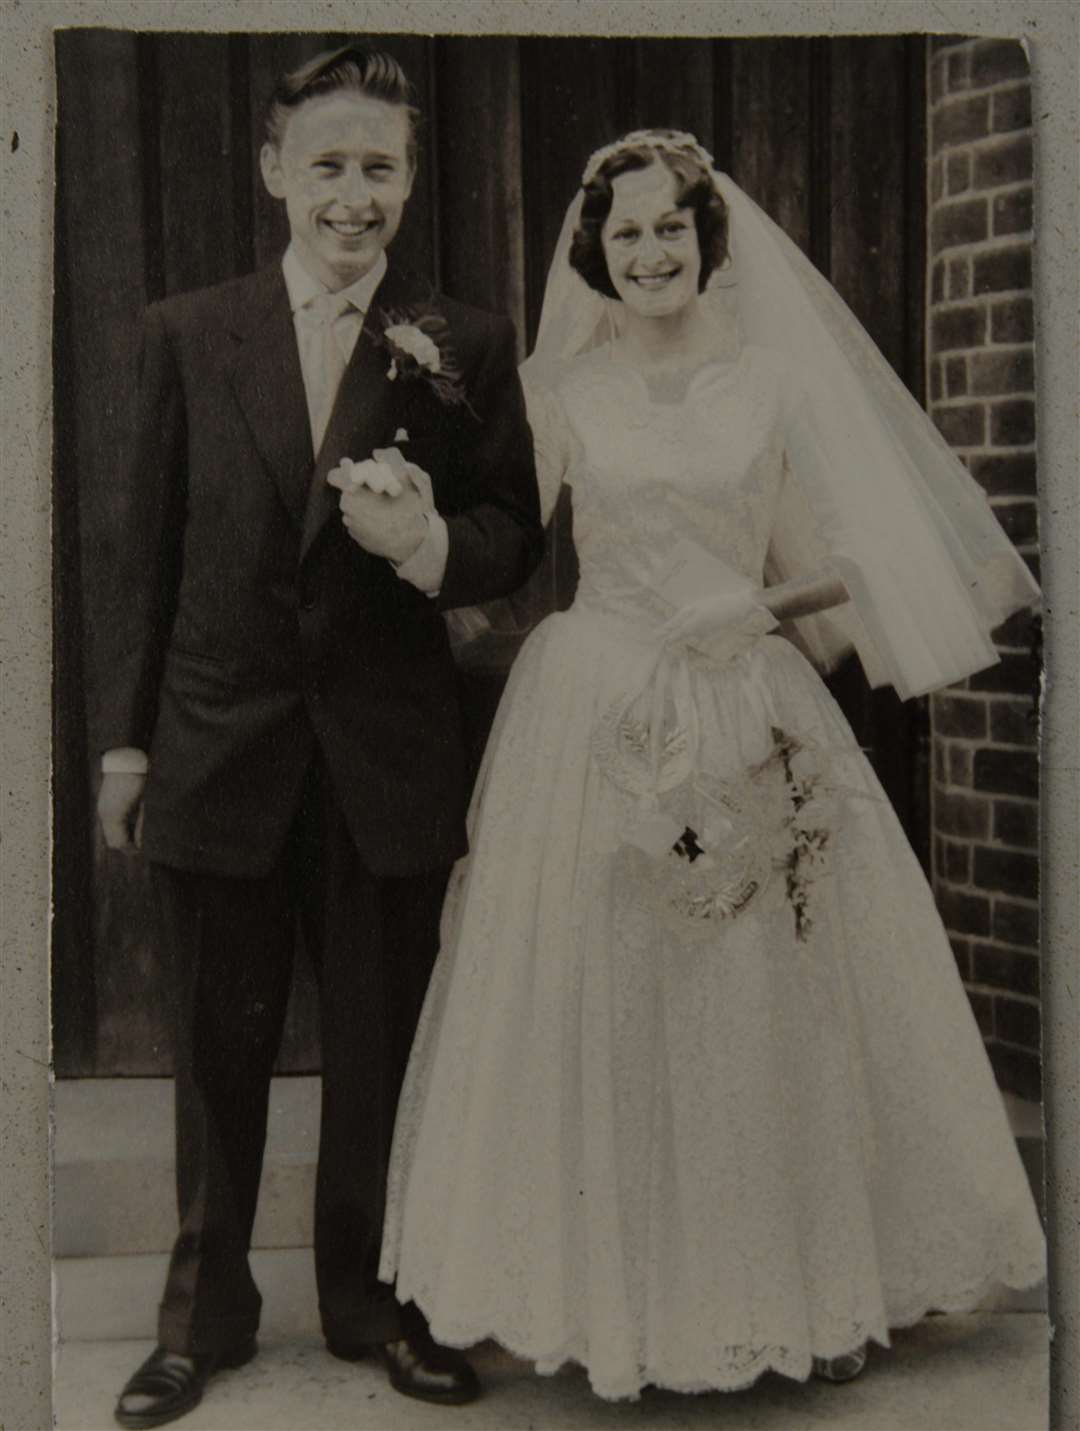 Terry and Margaret Saunders on their wedding day